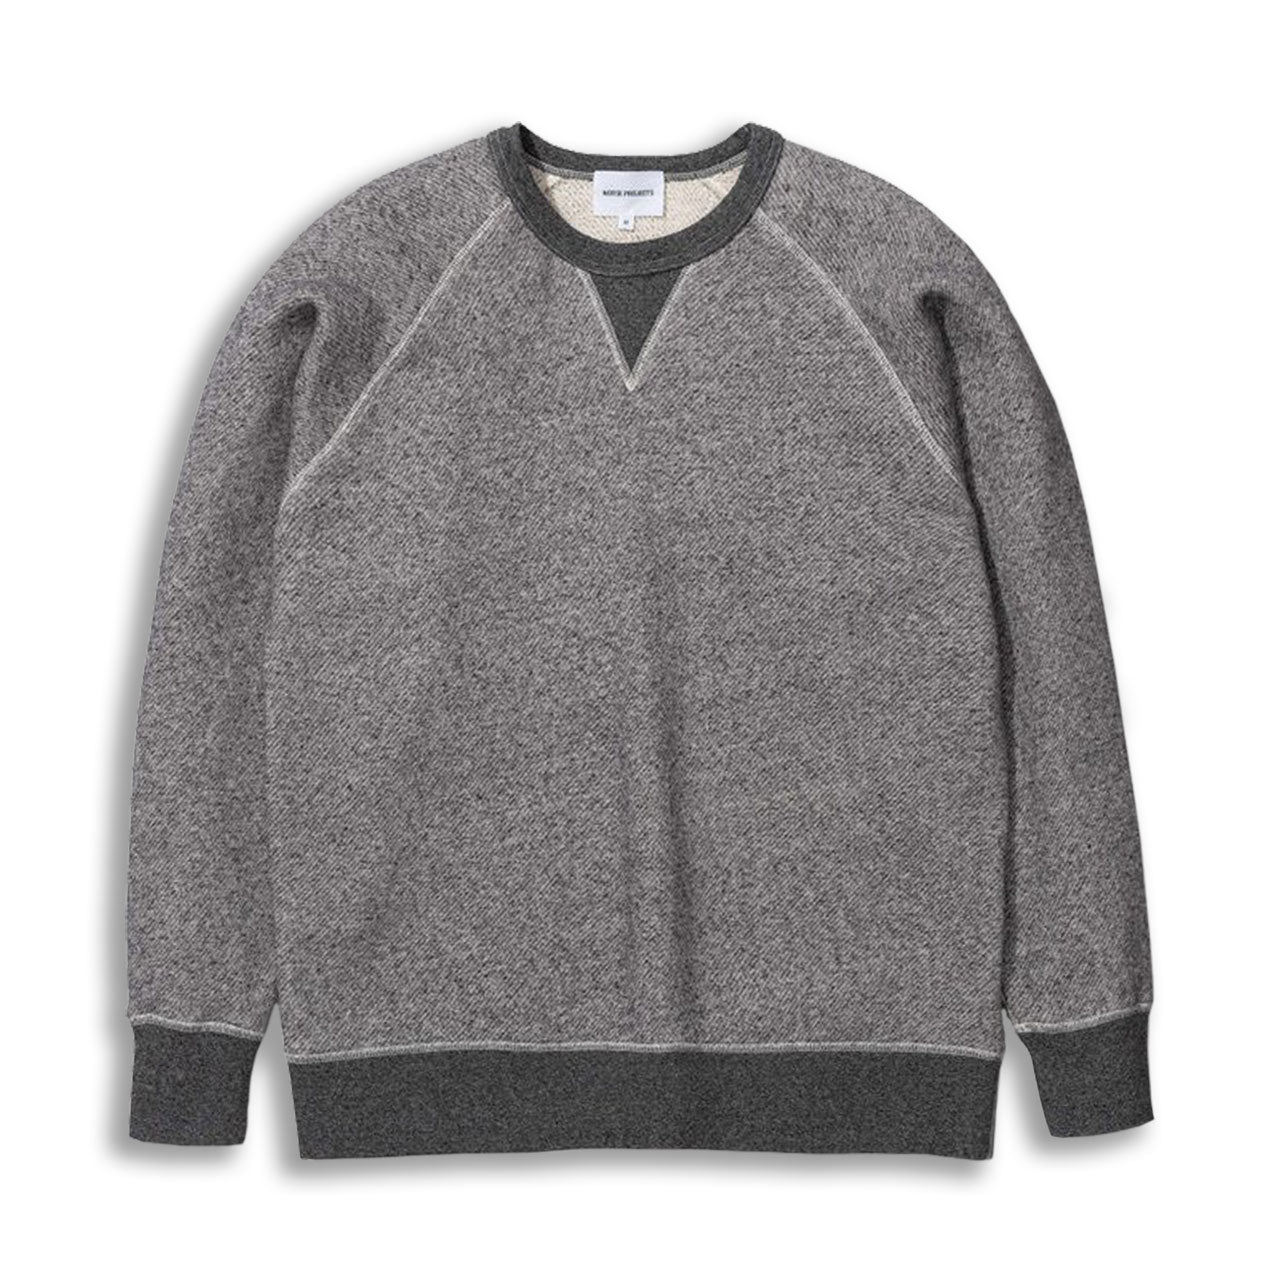 Norse Projects Kristian Sweatshirt | Uncrate Supply